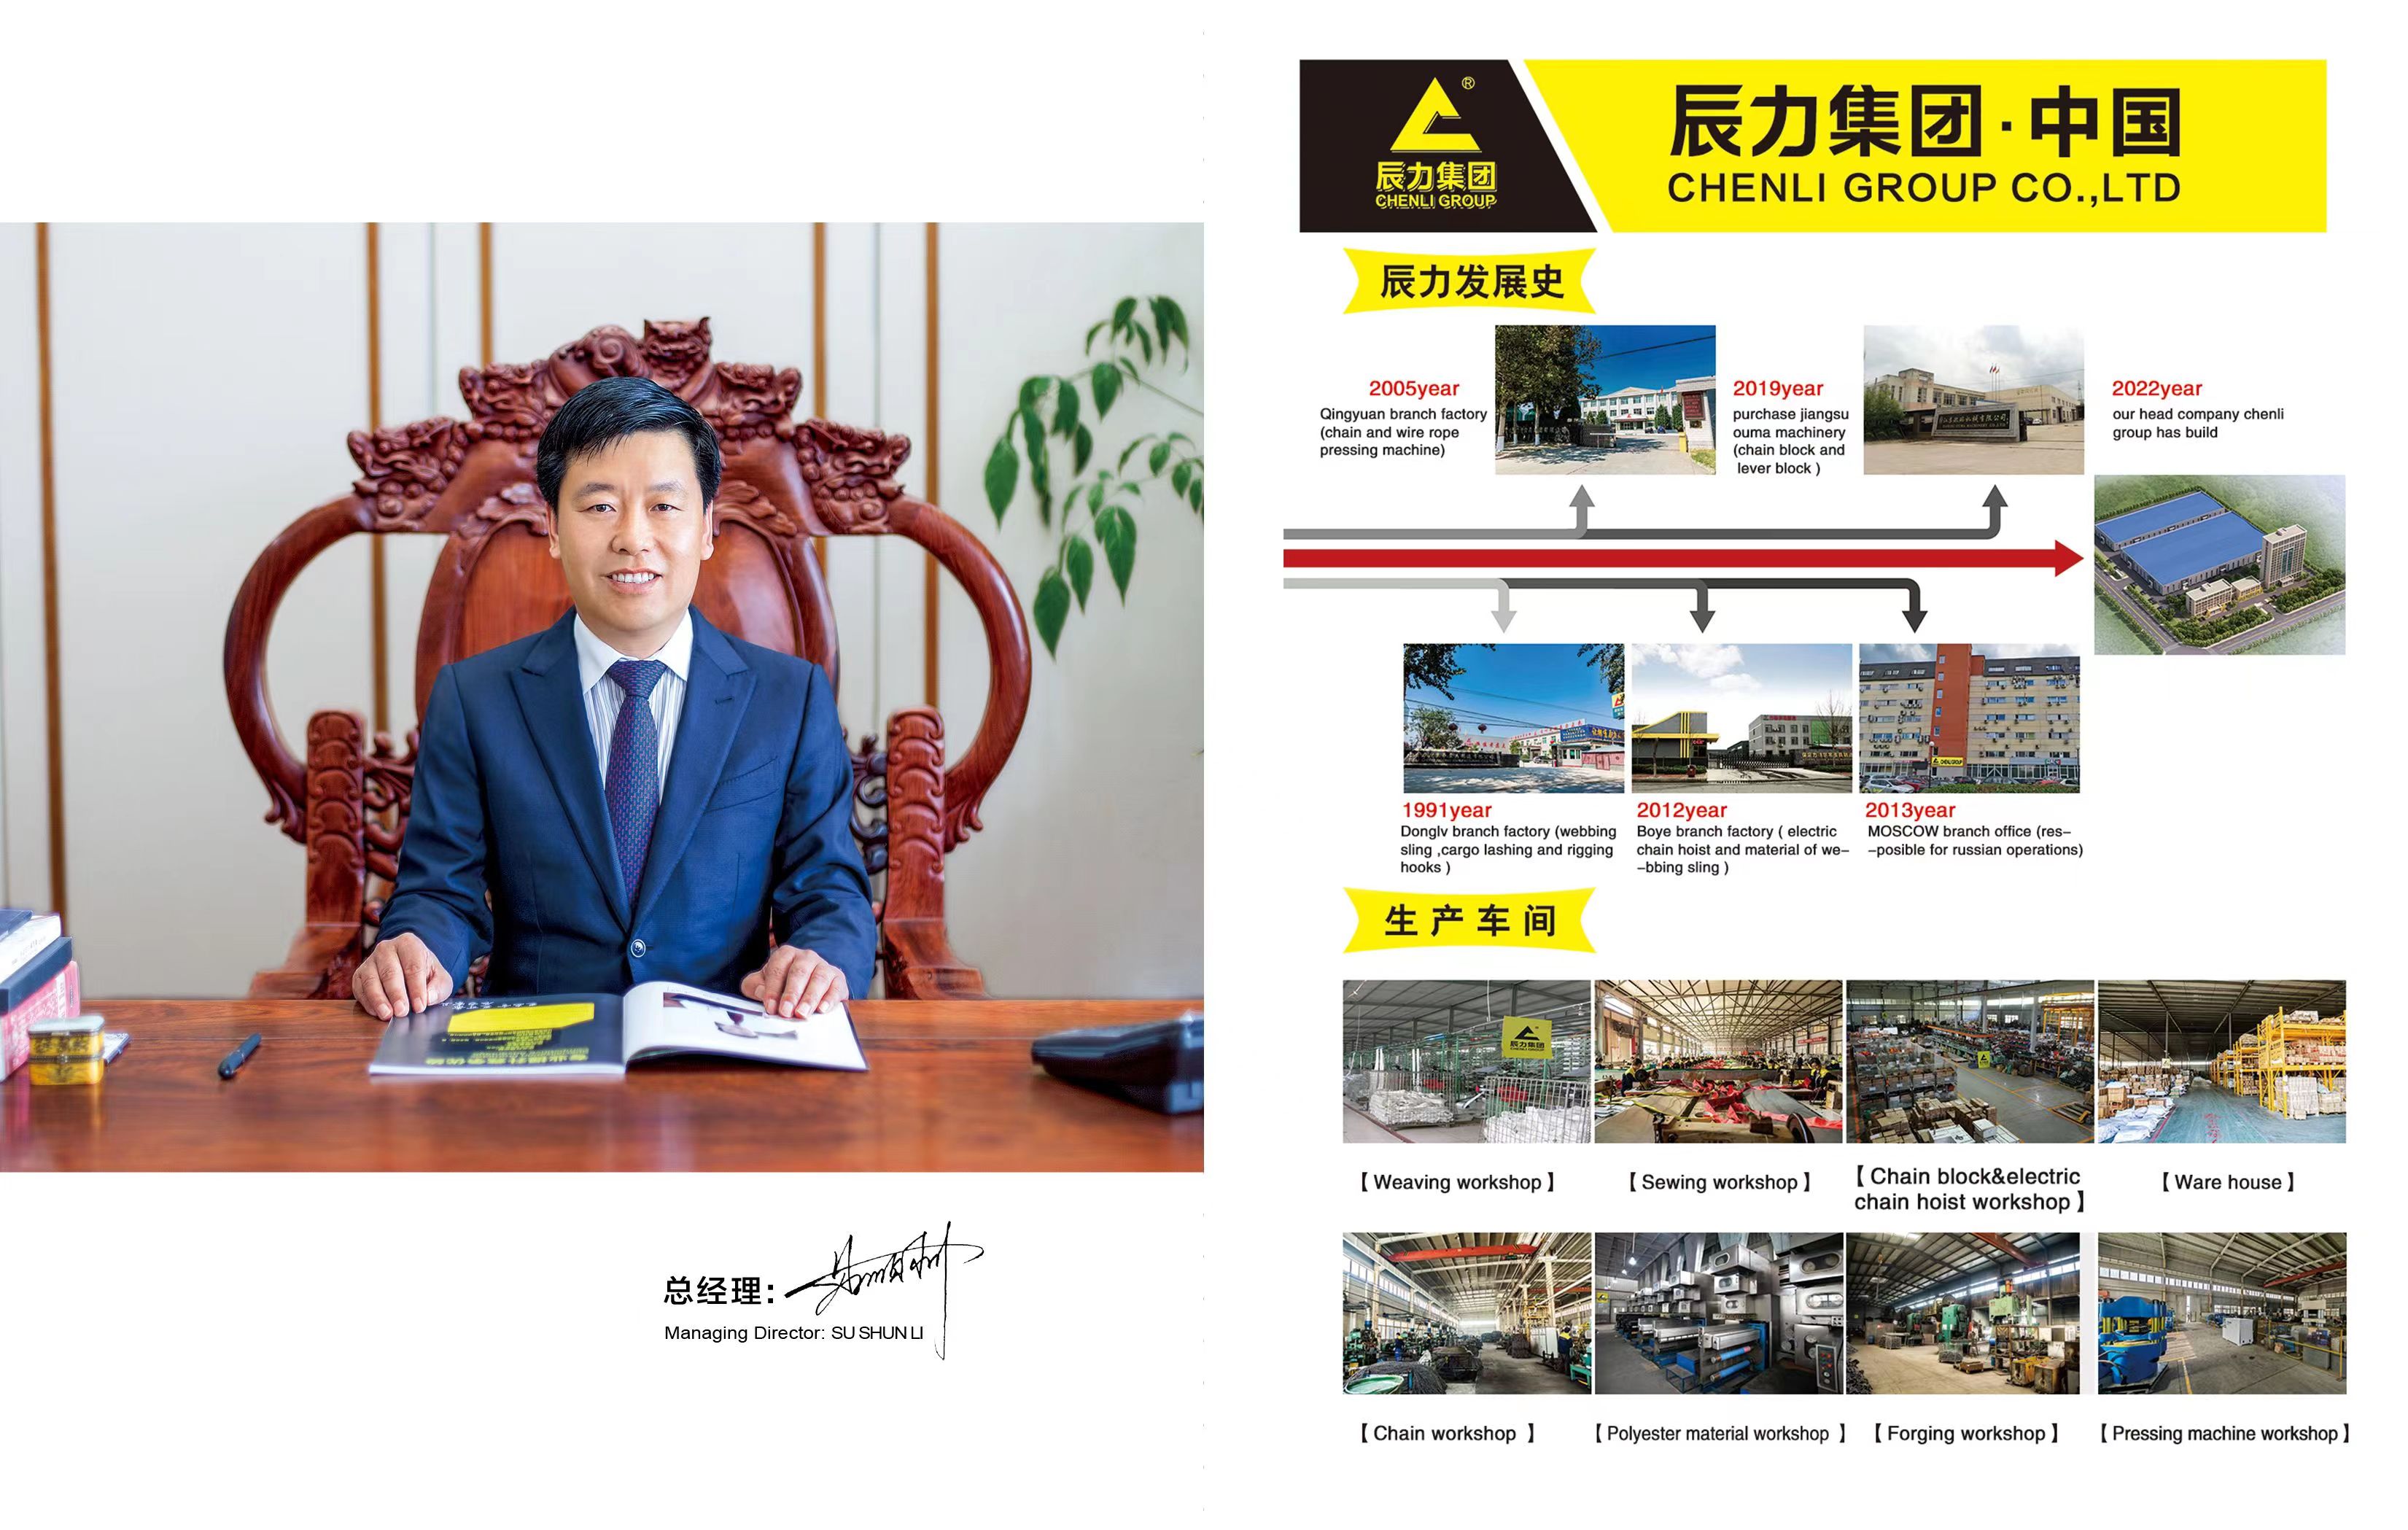 HISTORY OF CHENLI GROUP